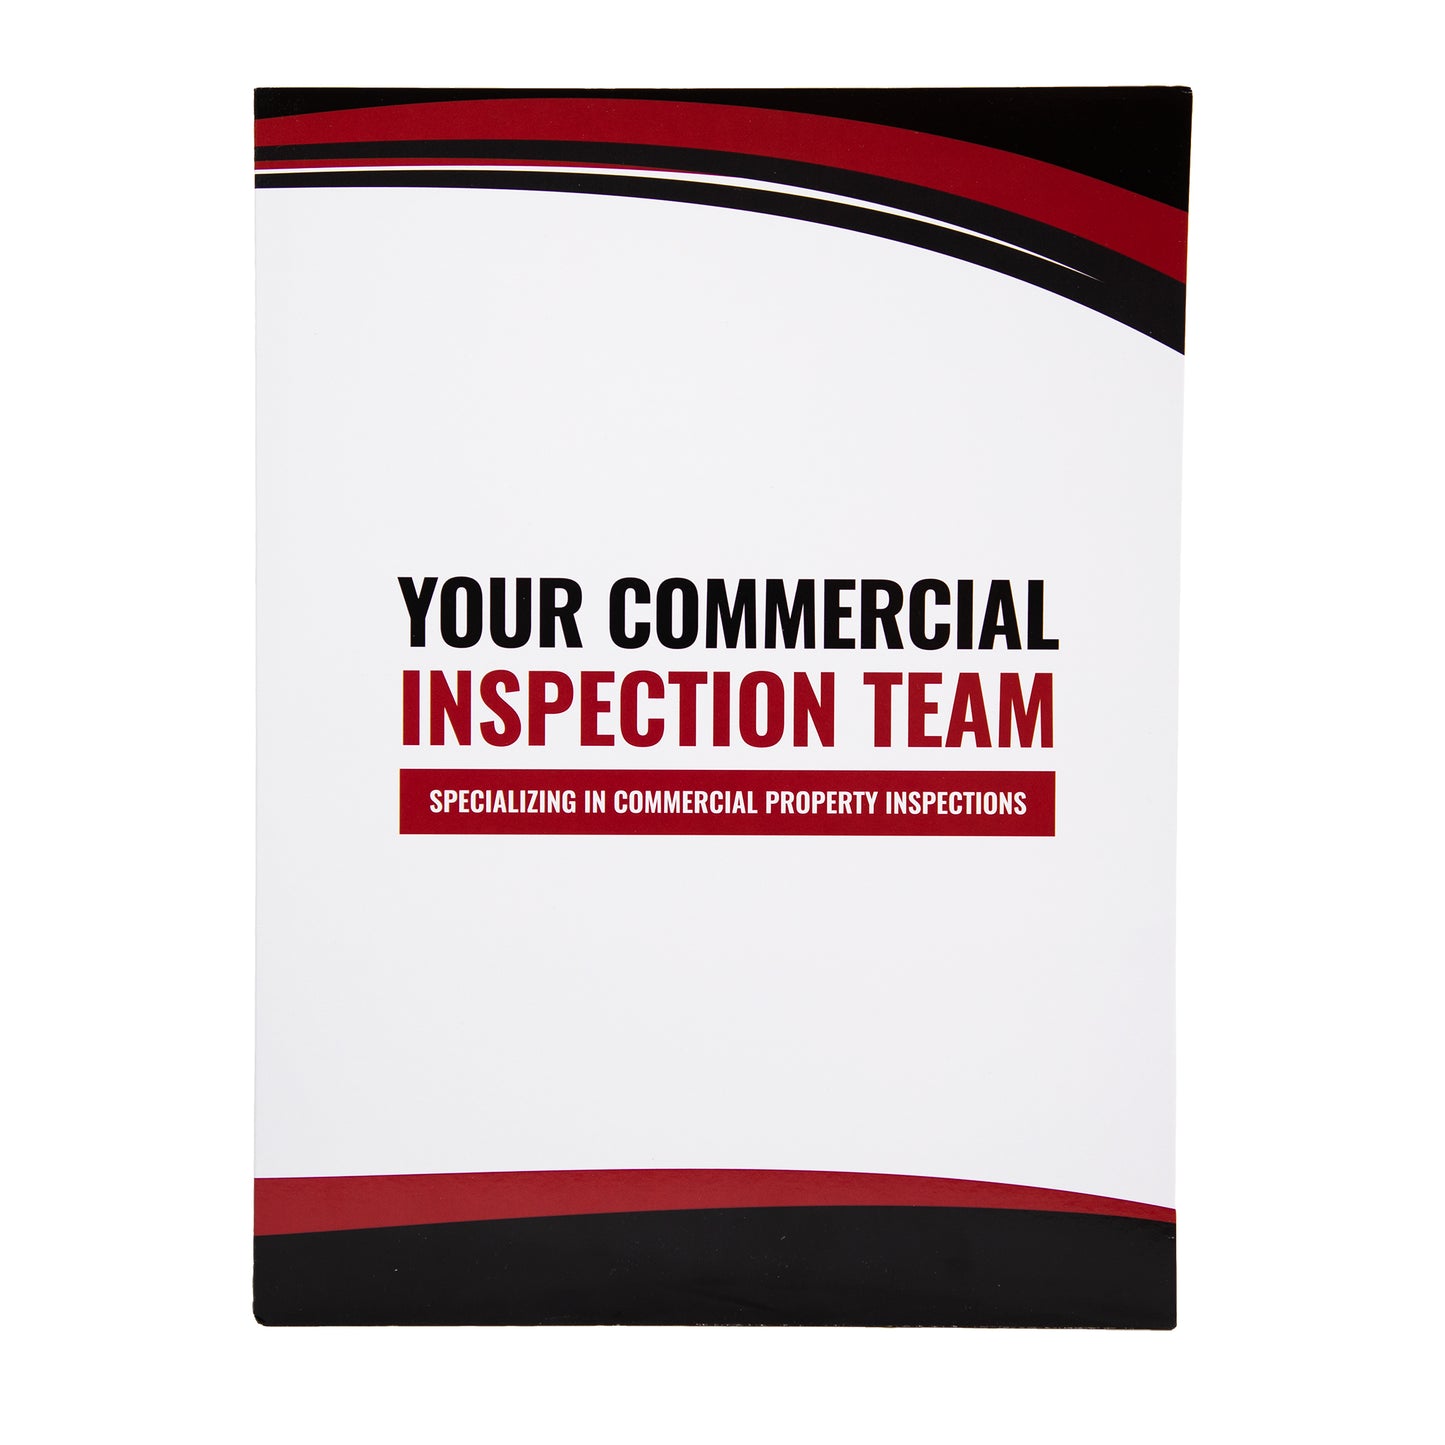 CCPIA Commercial Property Inspector Marketing Set